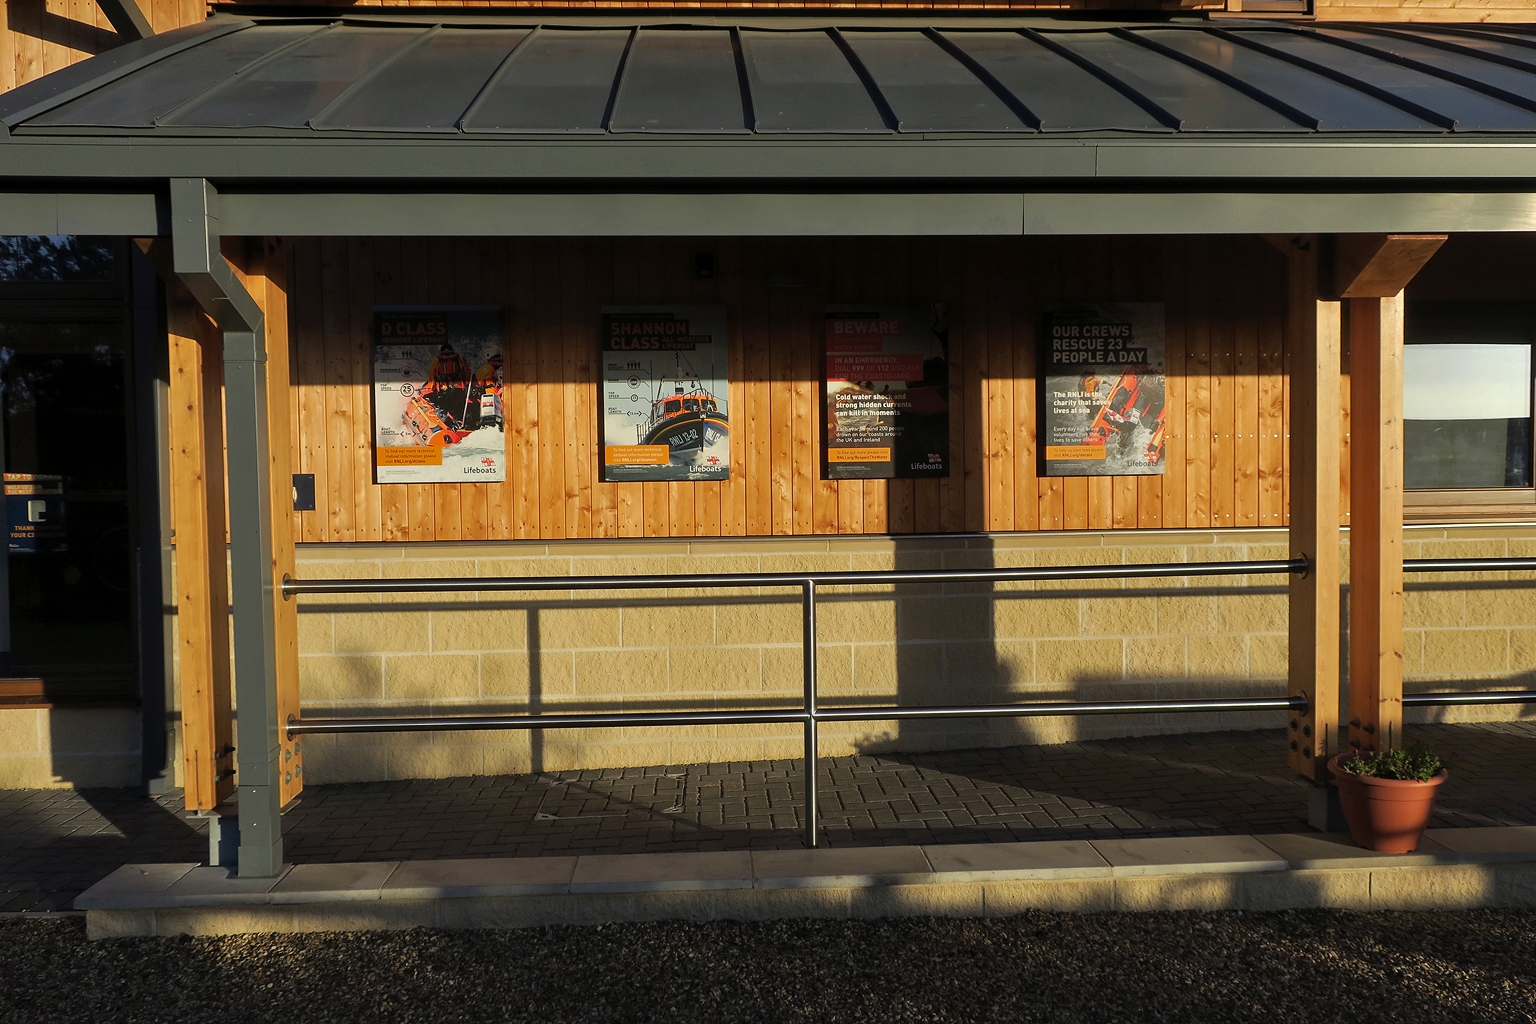 Information posters and ramp to visitor entrance